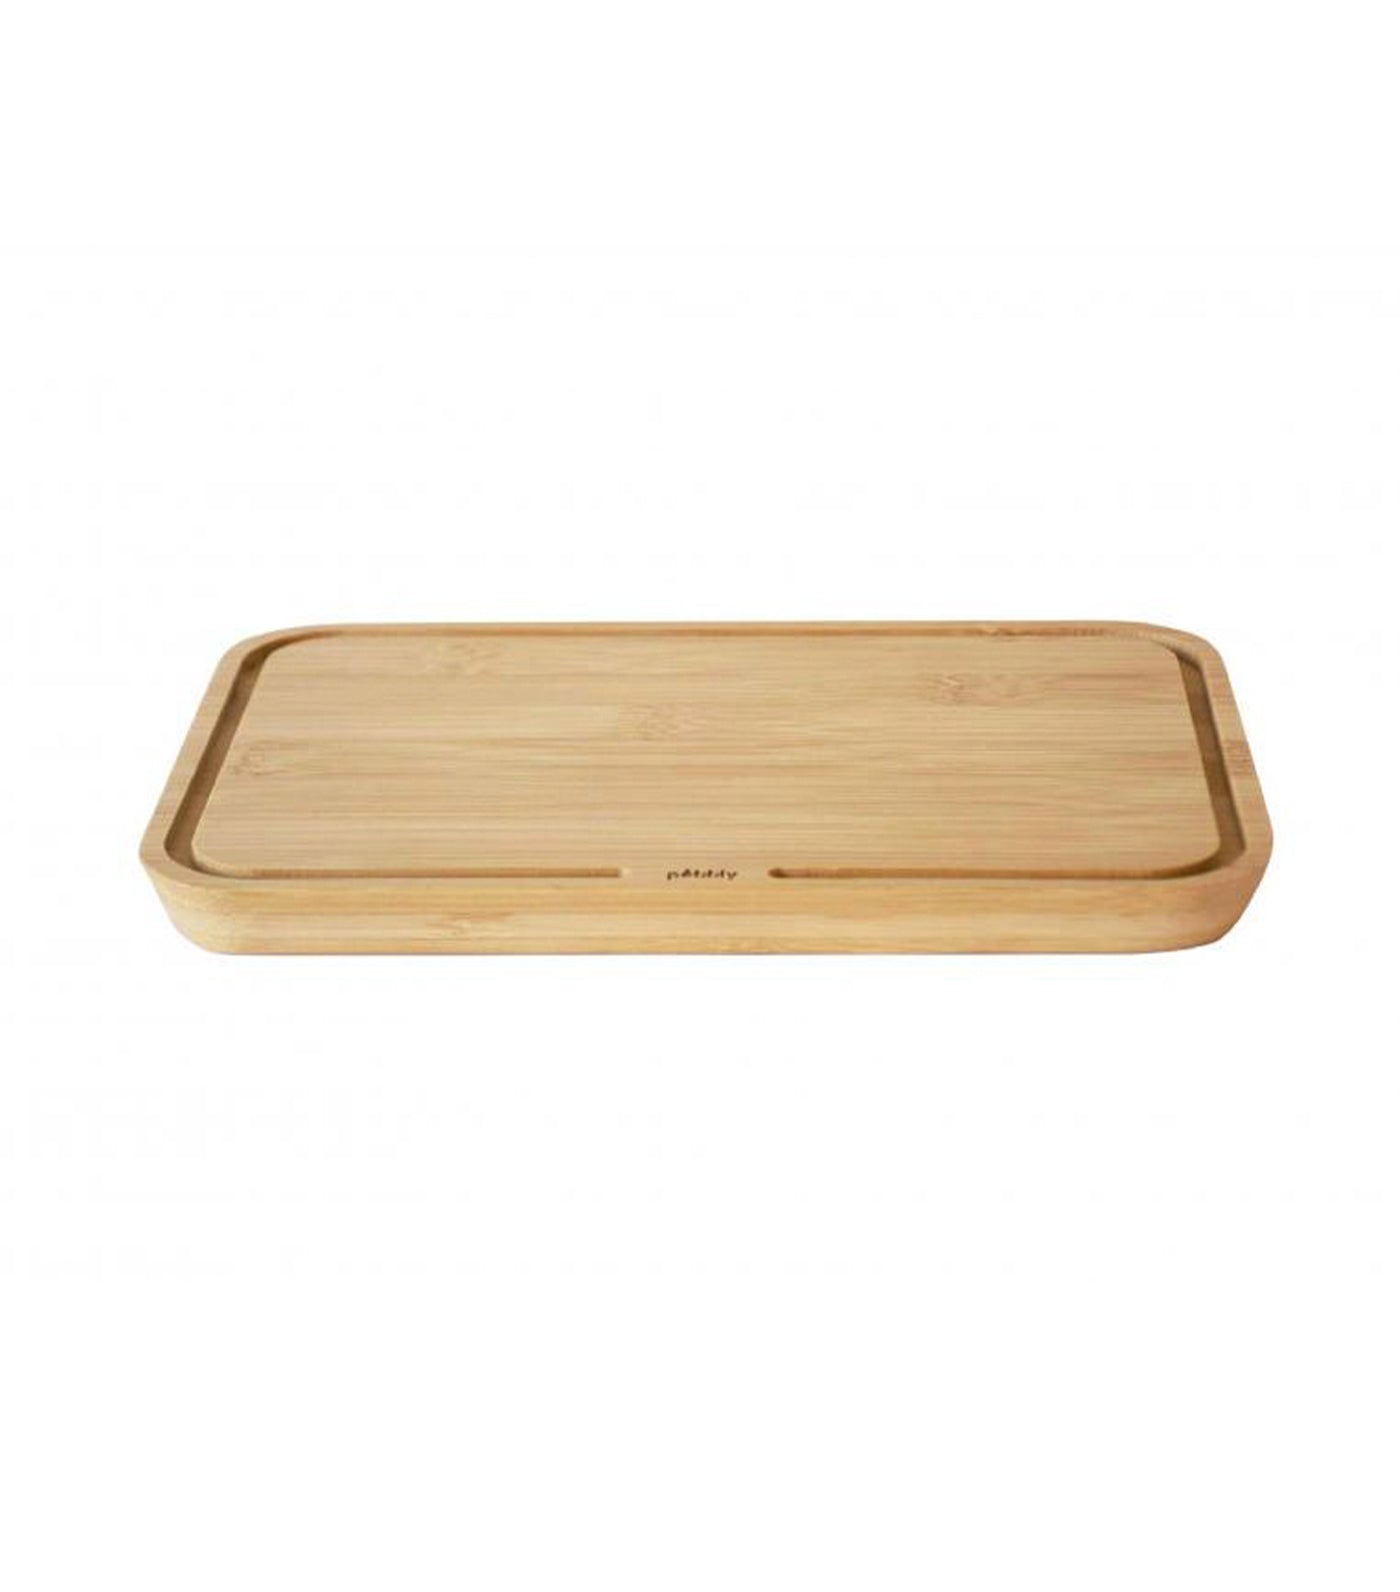 Pebbly Cutting Board - S